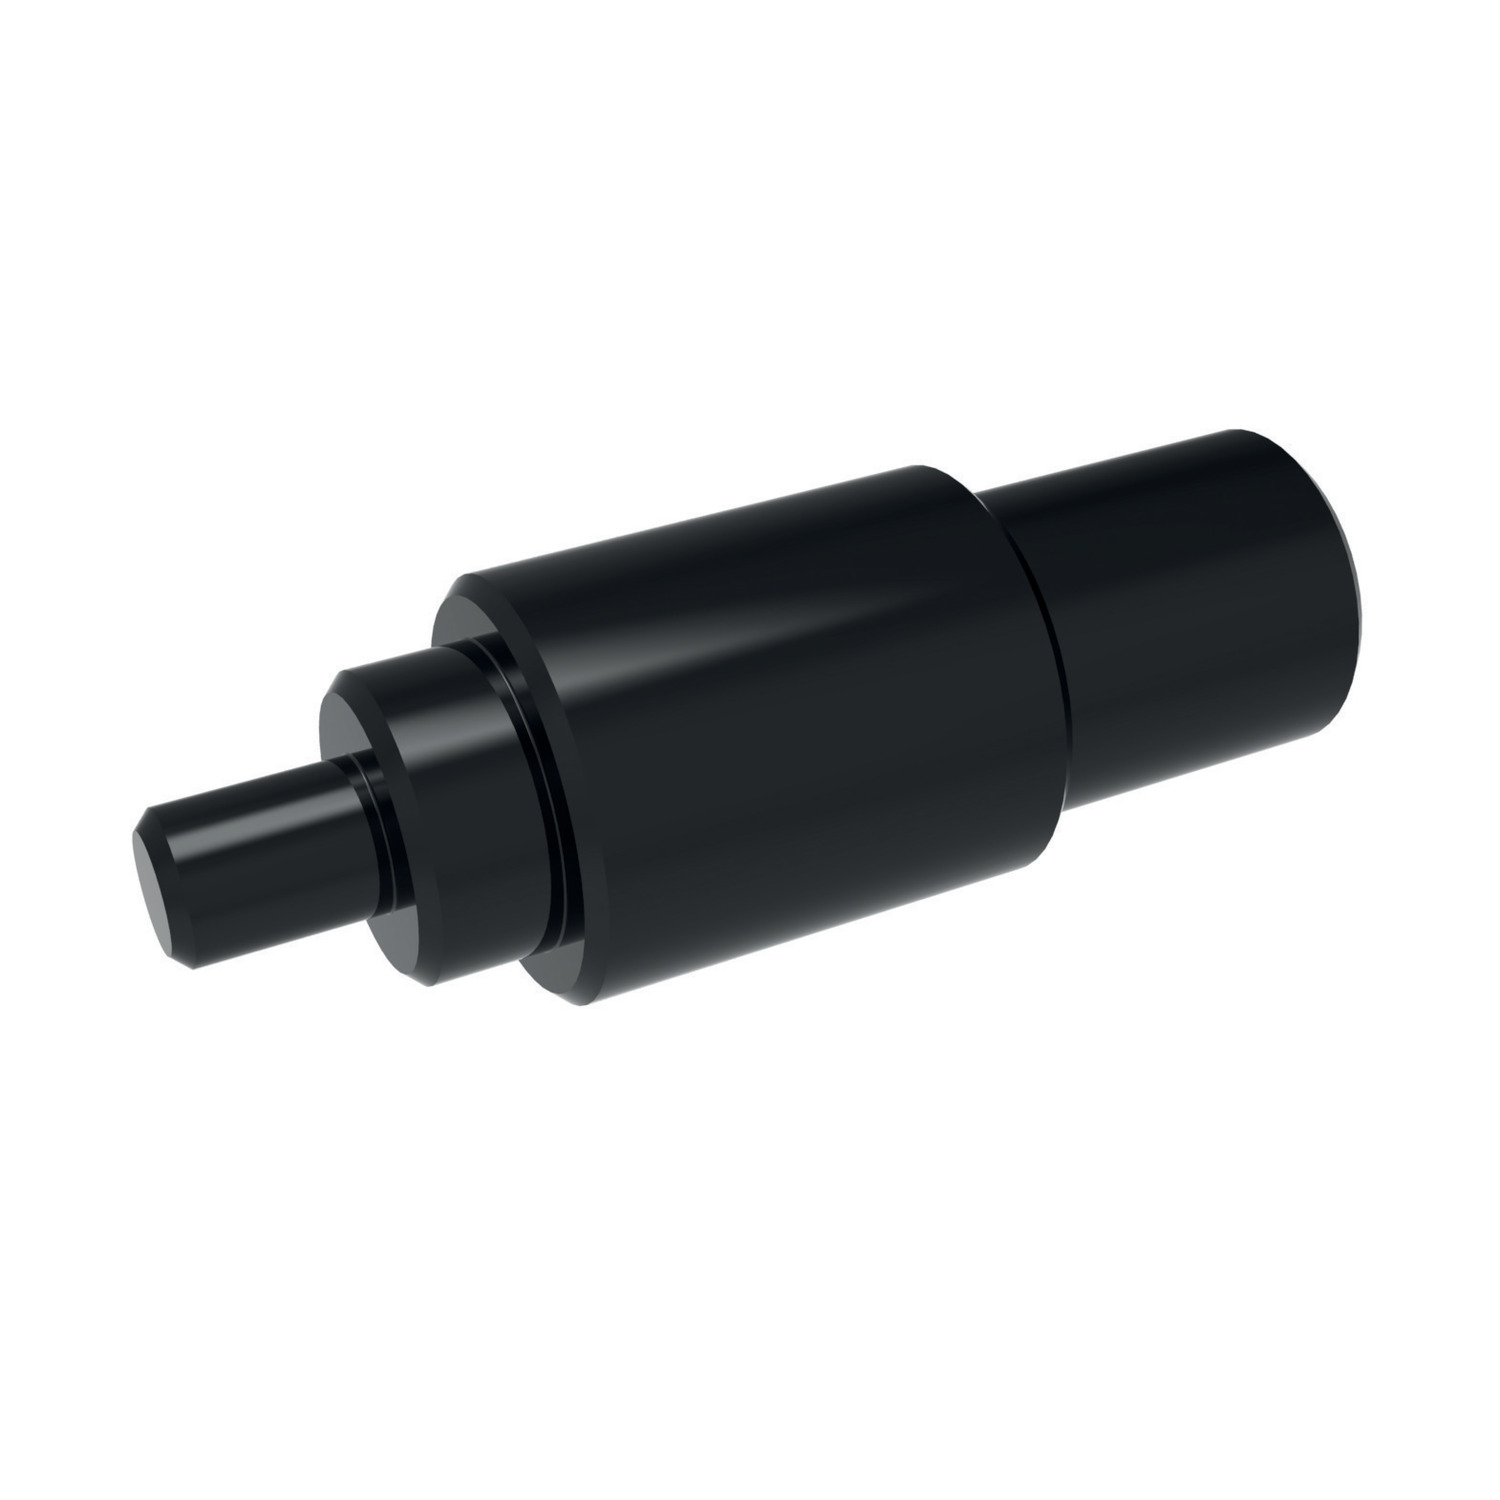 Installation Tool - Inch - Heavy Duty For threaded inserts 22022 and 22032.